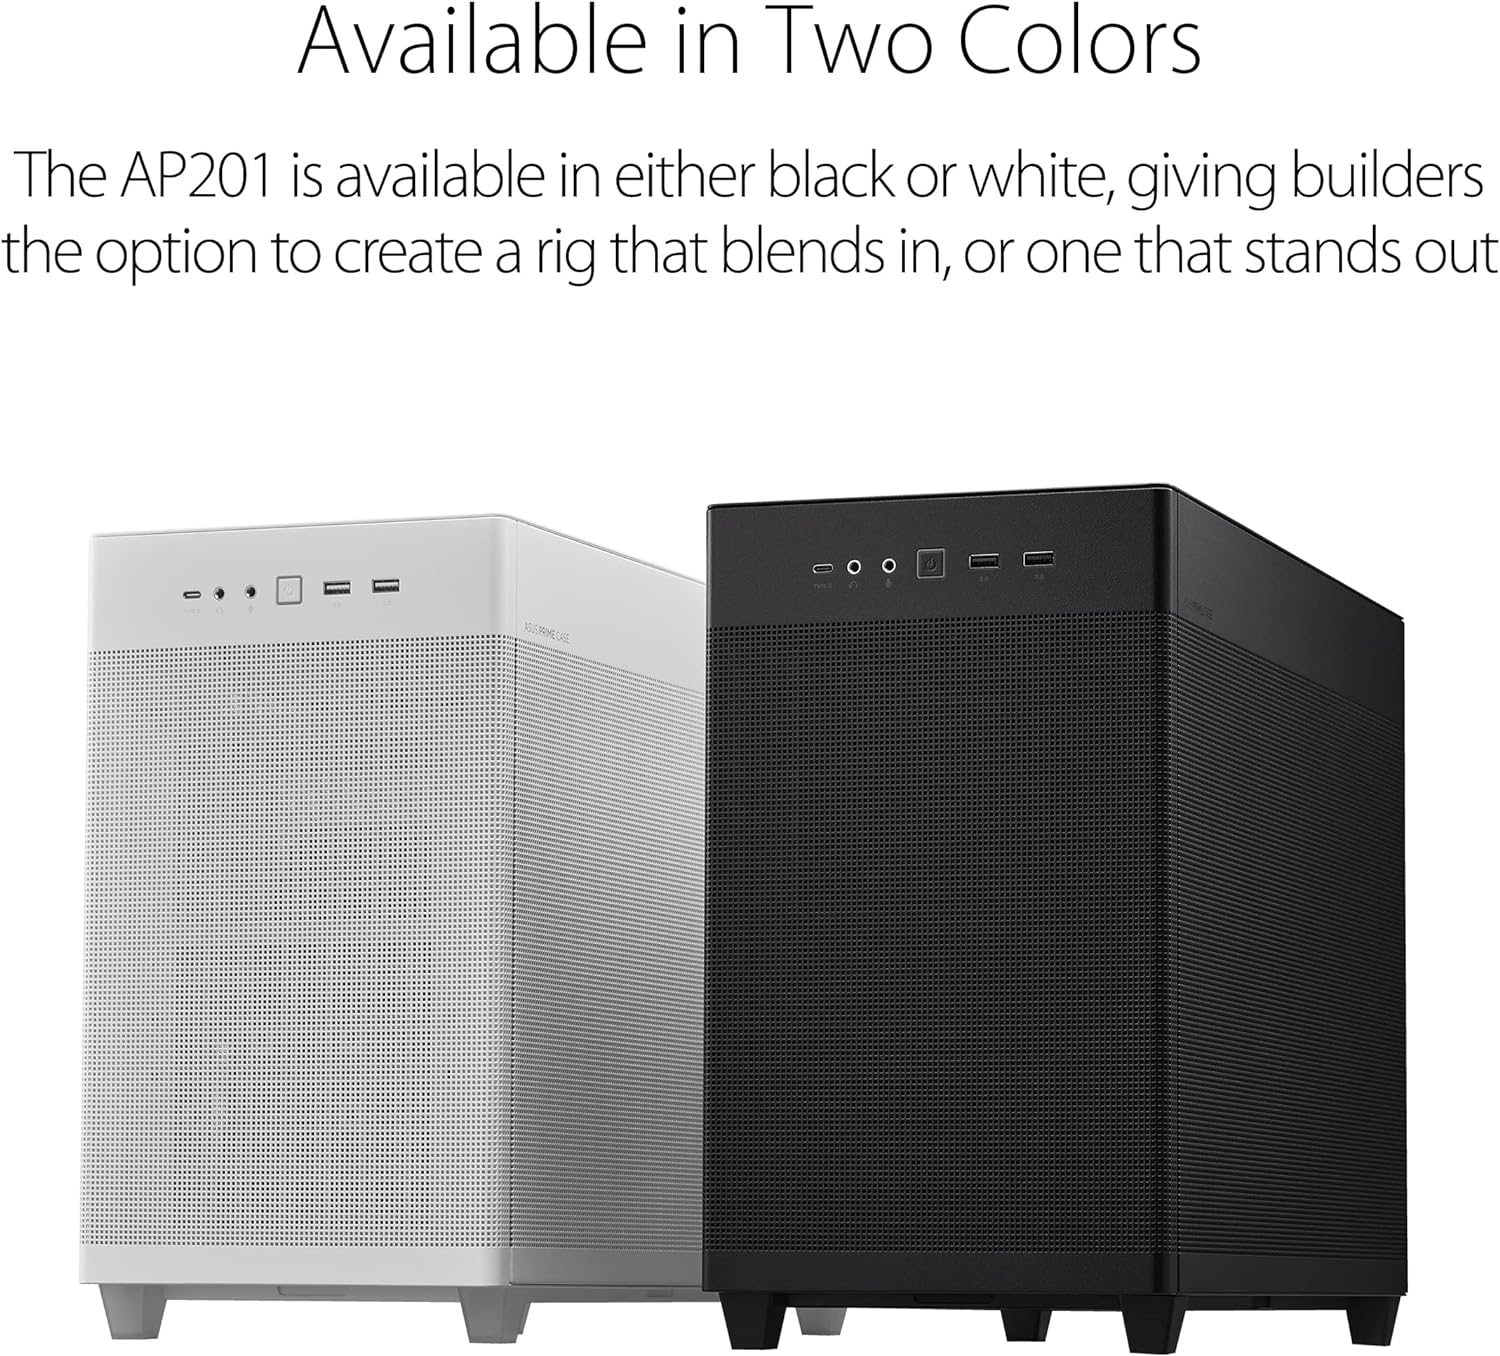 ASUS Prime AP201 33-Liter MicroATX White case with Tool-Free Side Panels and a Quasi-Filter mesh, with Support for 360 mm Coolers, Graphics Cards up to 338 mm Long, and Standard ATX PSUs